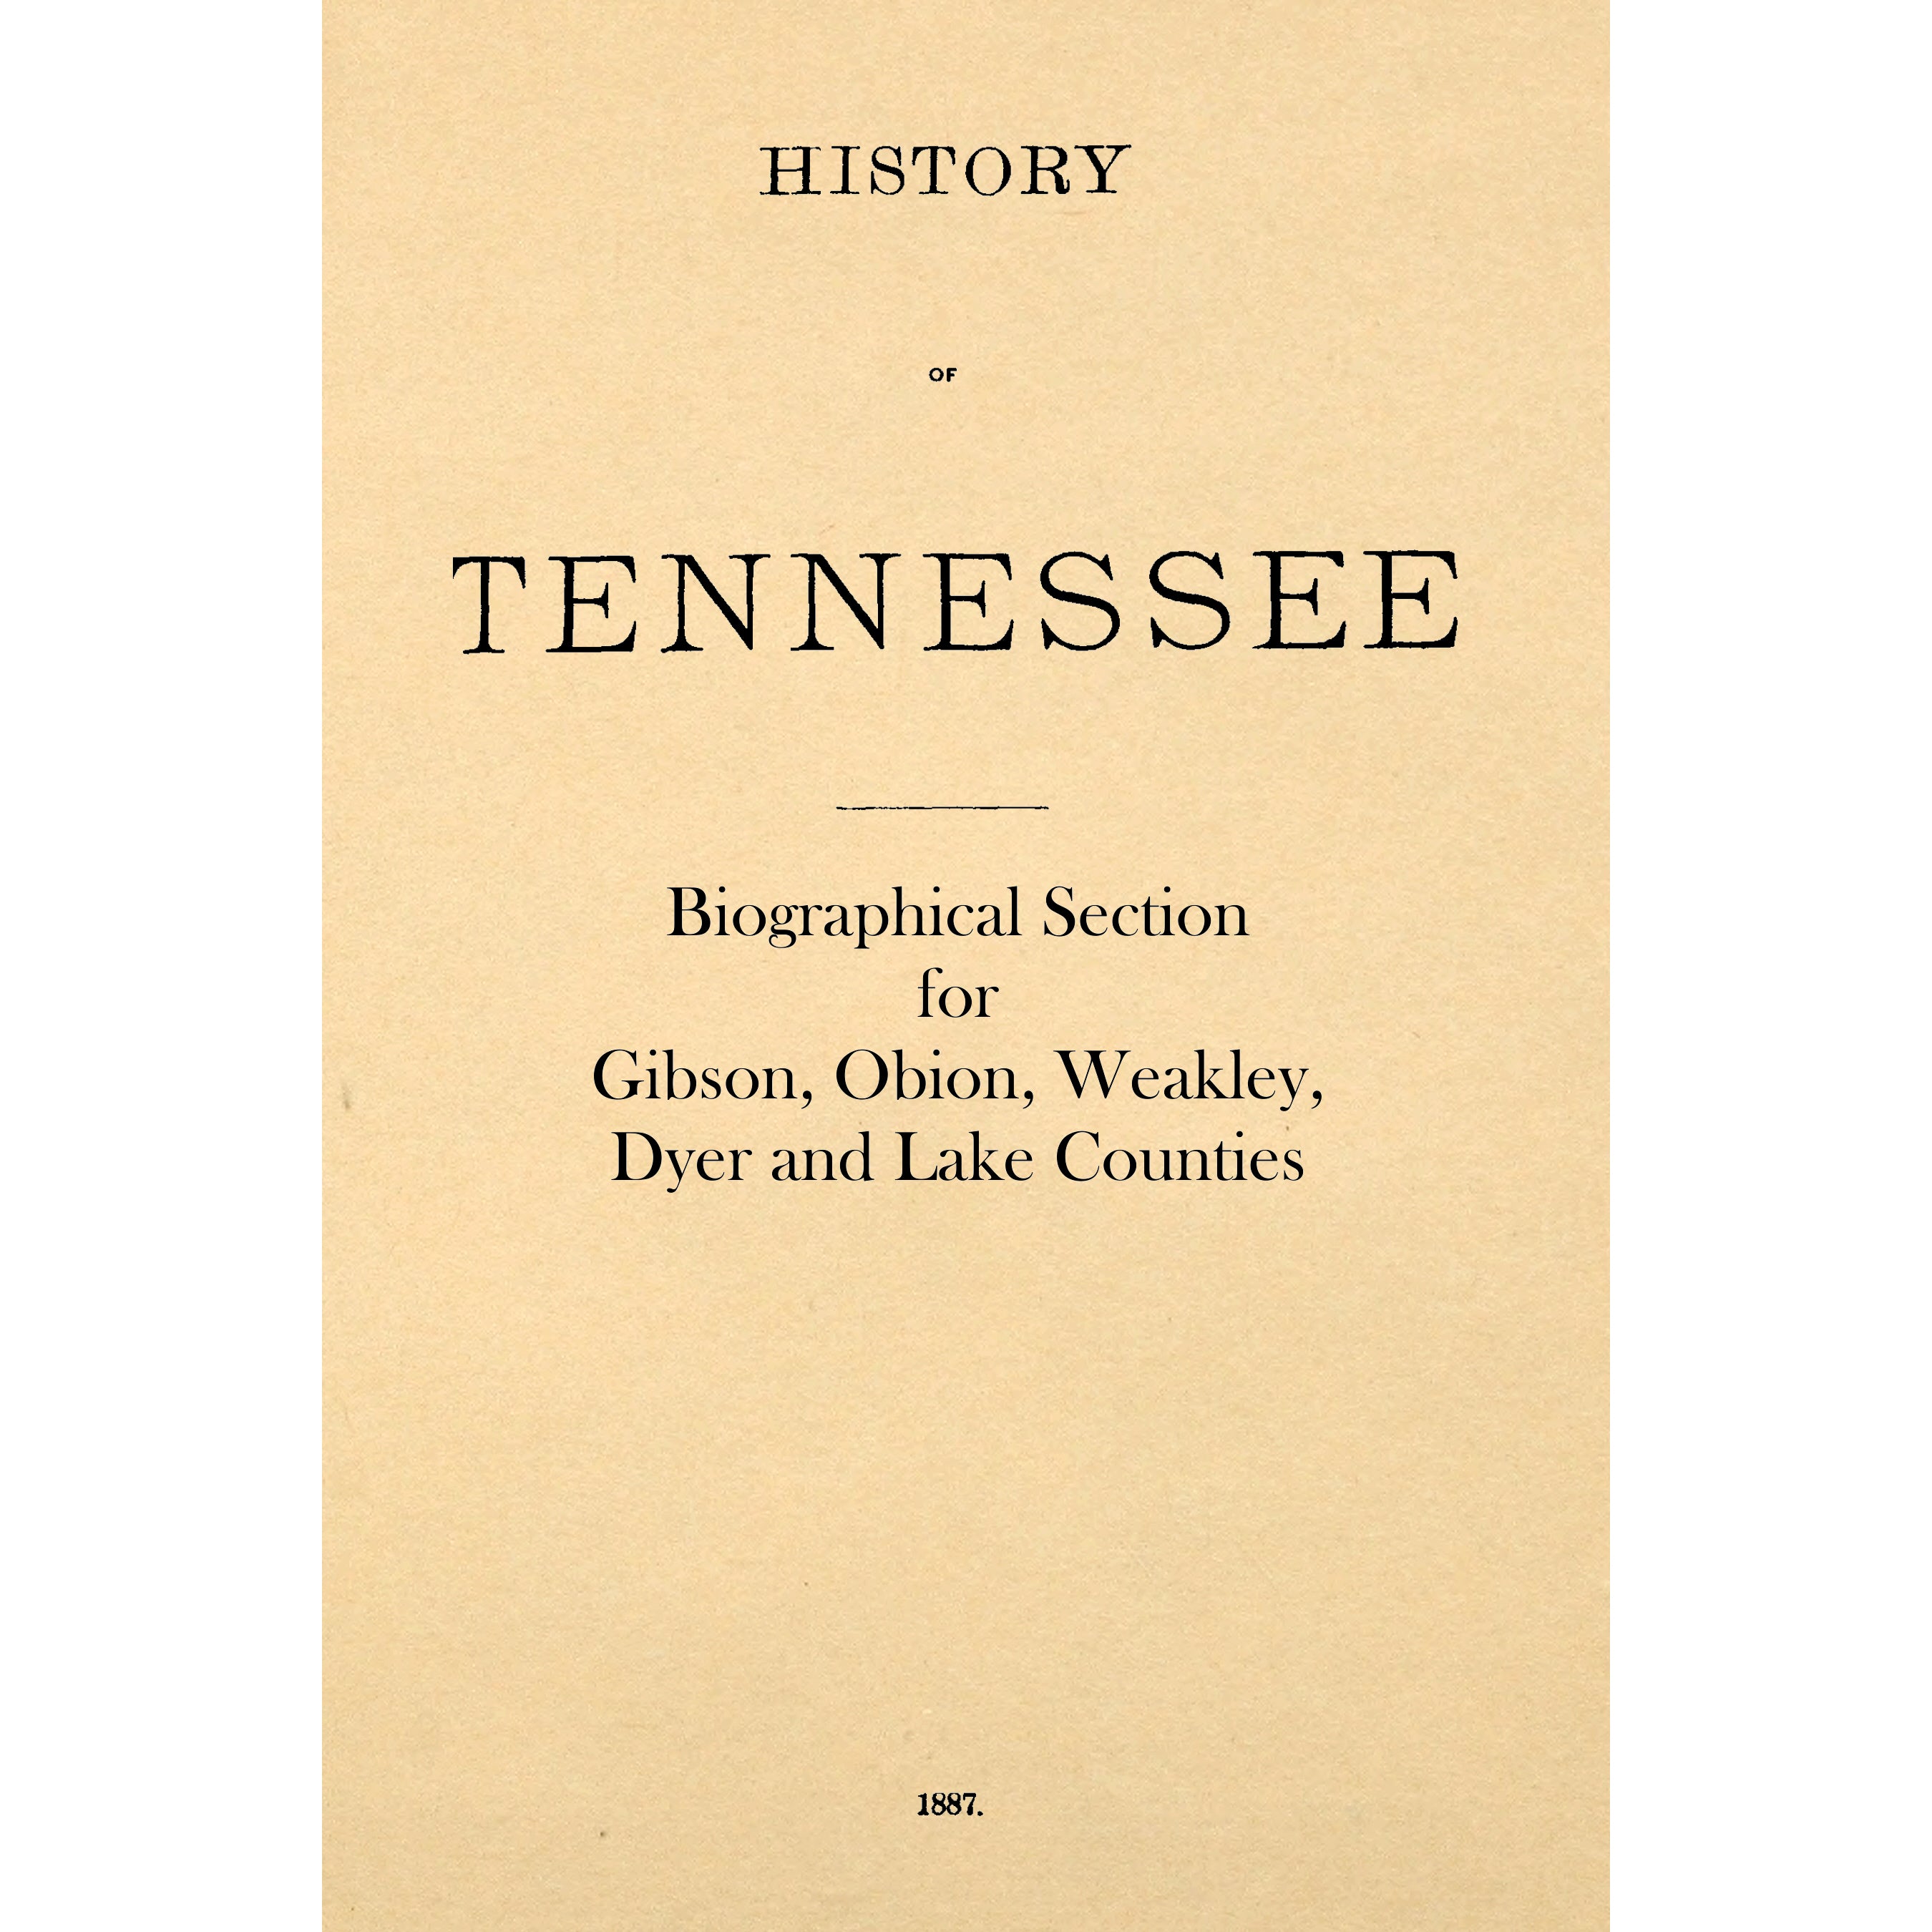 History of Tennessee [Biographical Section]